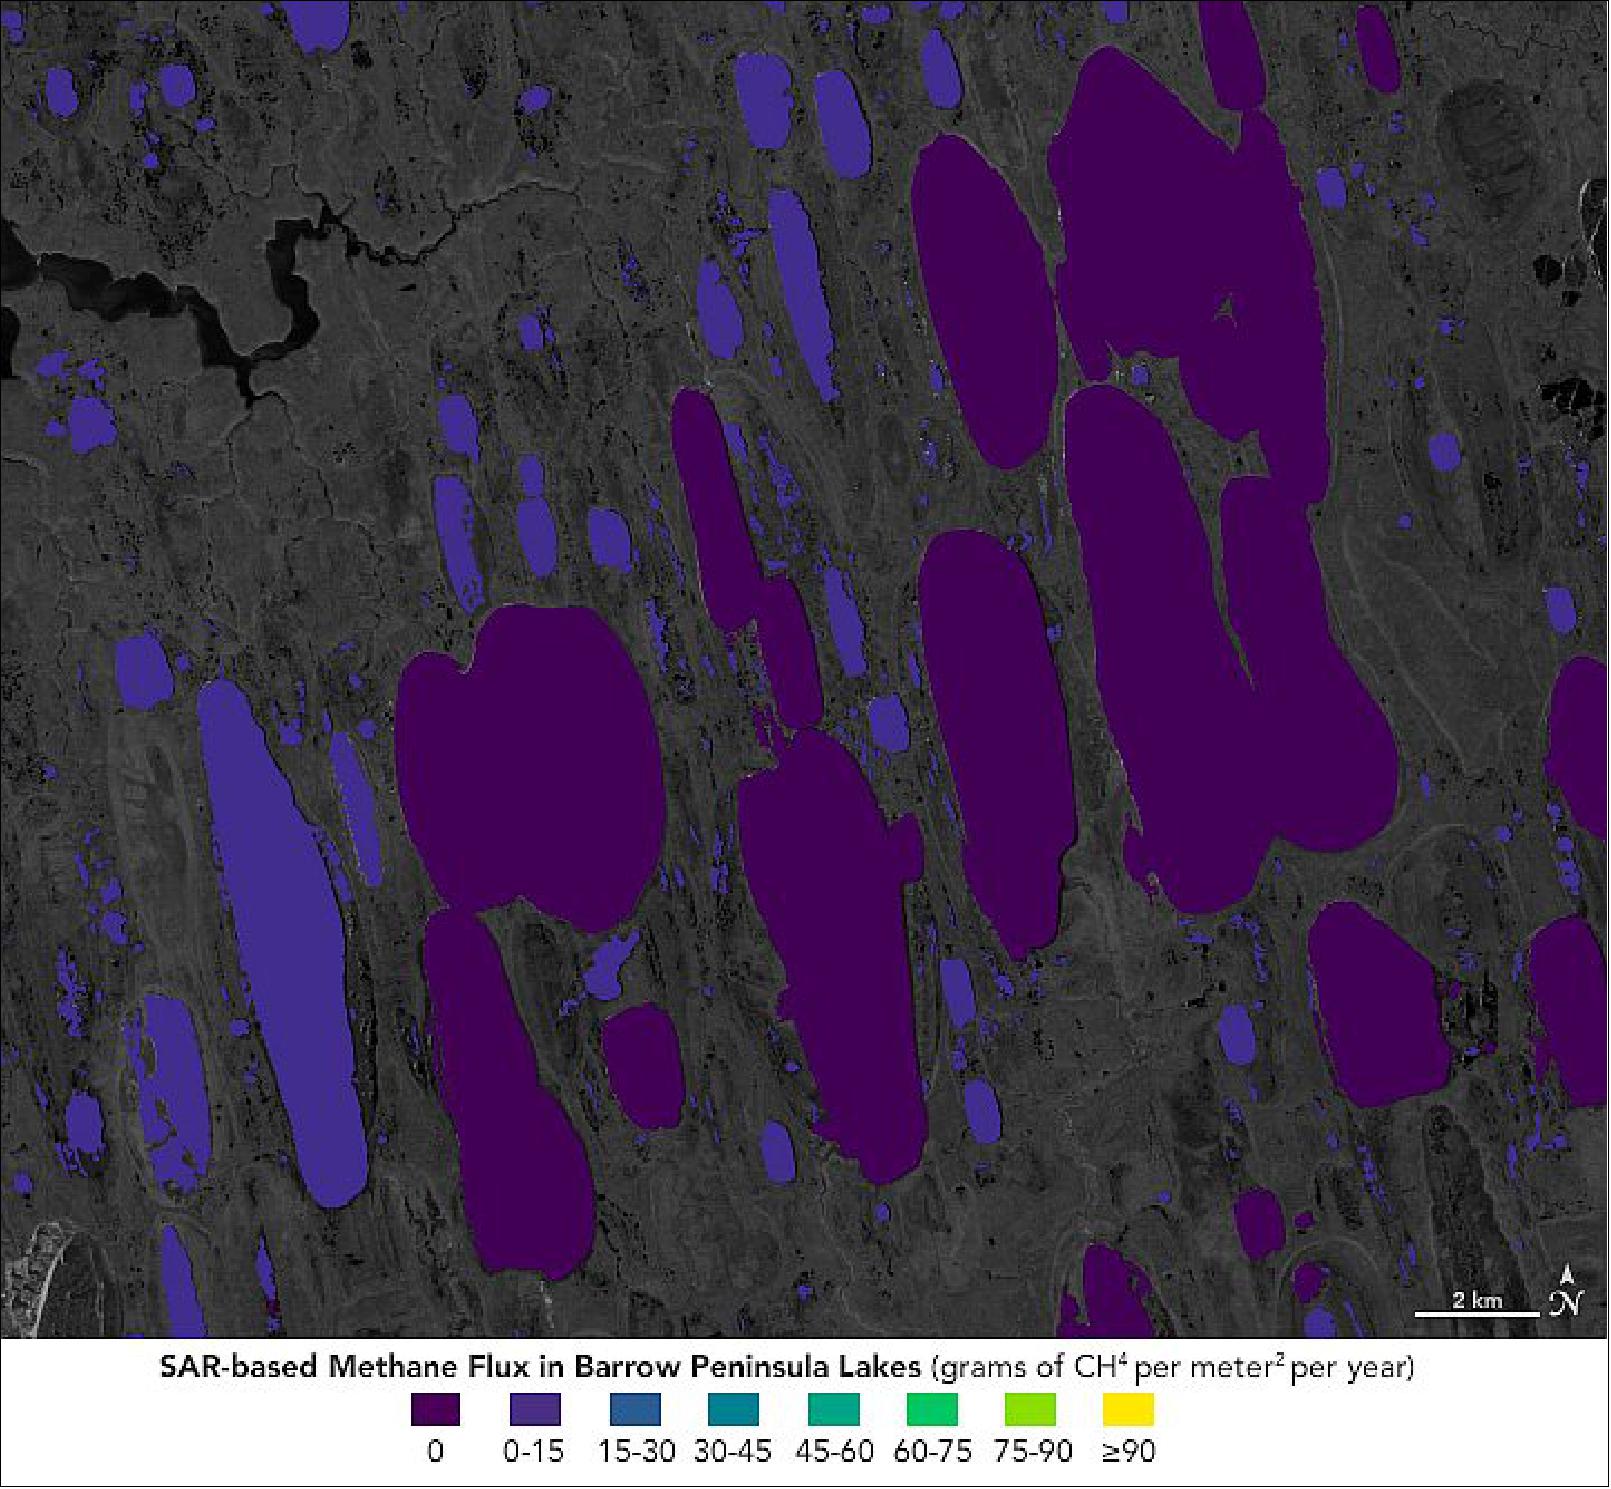 Figure 15: A key reason the small lakes around Fairbanks had such high fluxes is that they are located within yedoma—a type of Pleistocene-aged permafrost rich with organic material that releases significant amounts of methane when thawed. There are also some gravel-filled mining lakes around Fairbanks that have very low methane flux. In more northerly parts of Alaska, such as Barrow Peninsula, lakes tended to be larger, more numerous, and had a lower flux (image credit: NASA Earth Observatory)